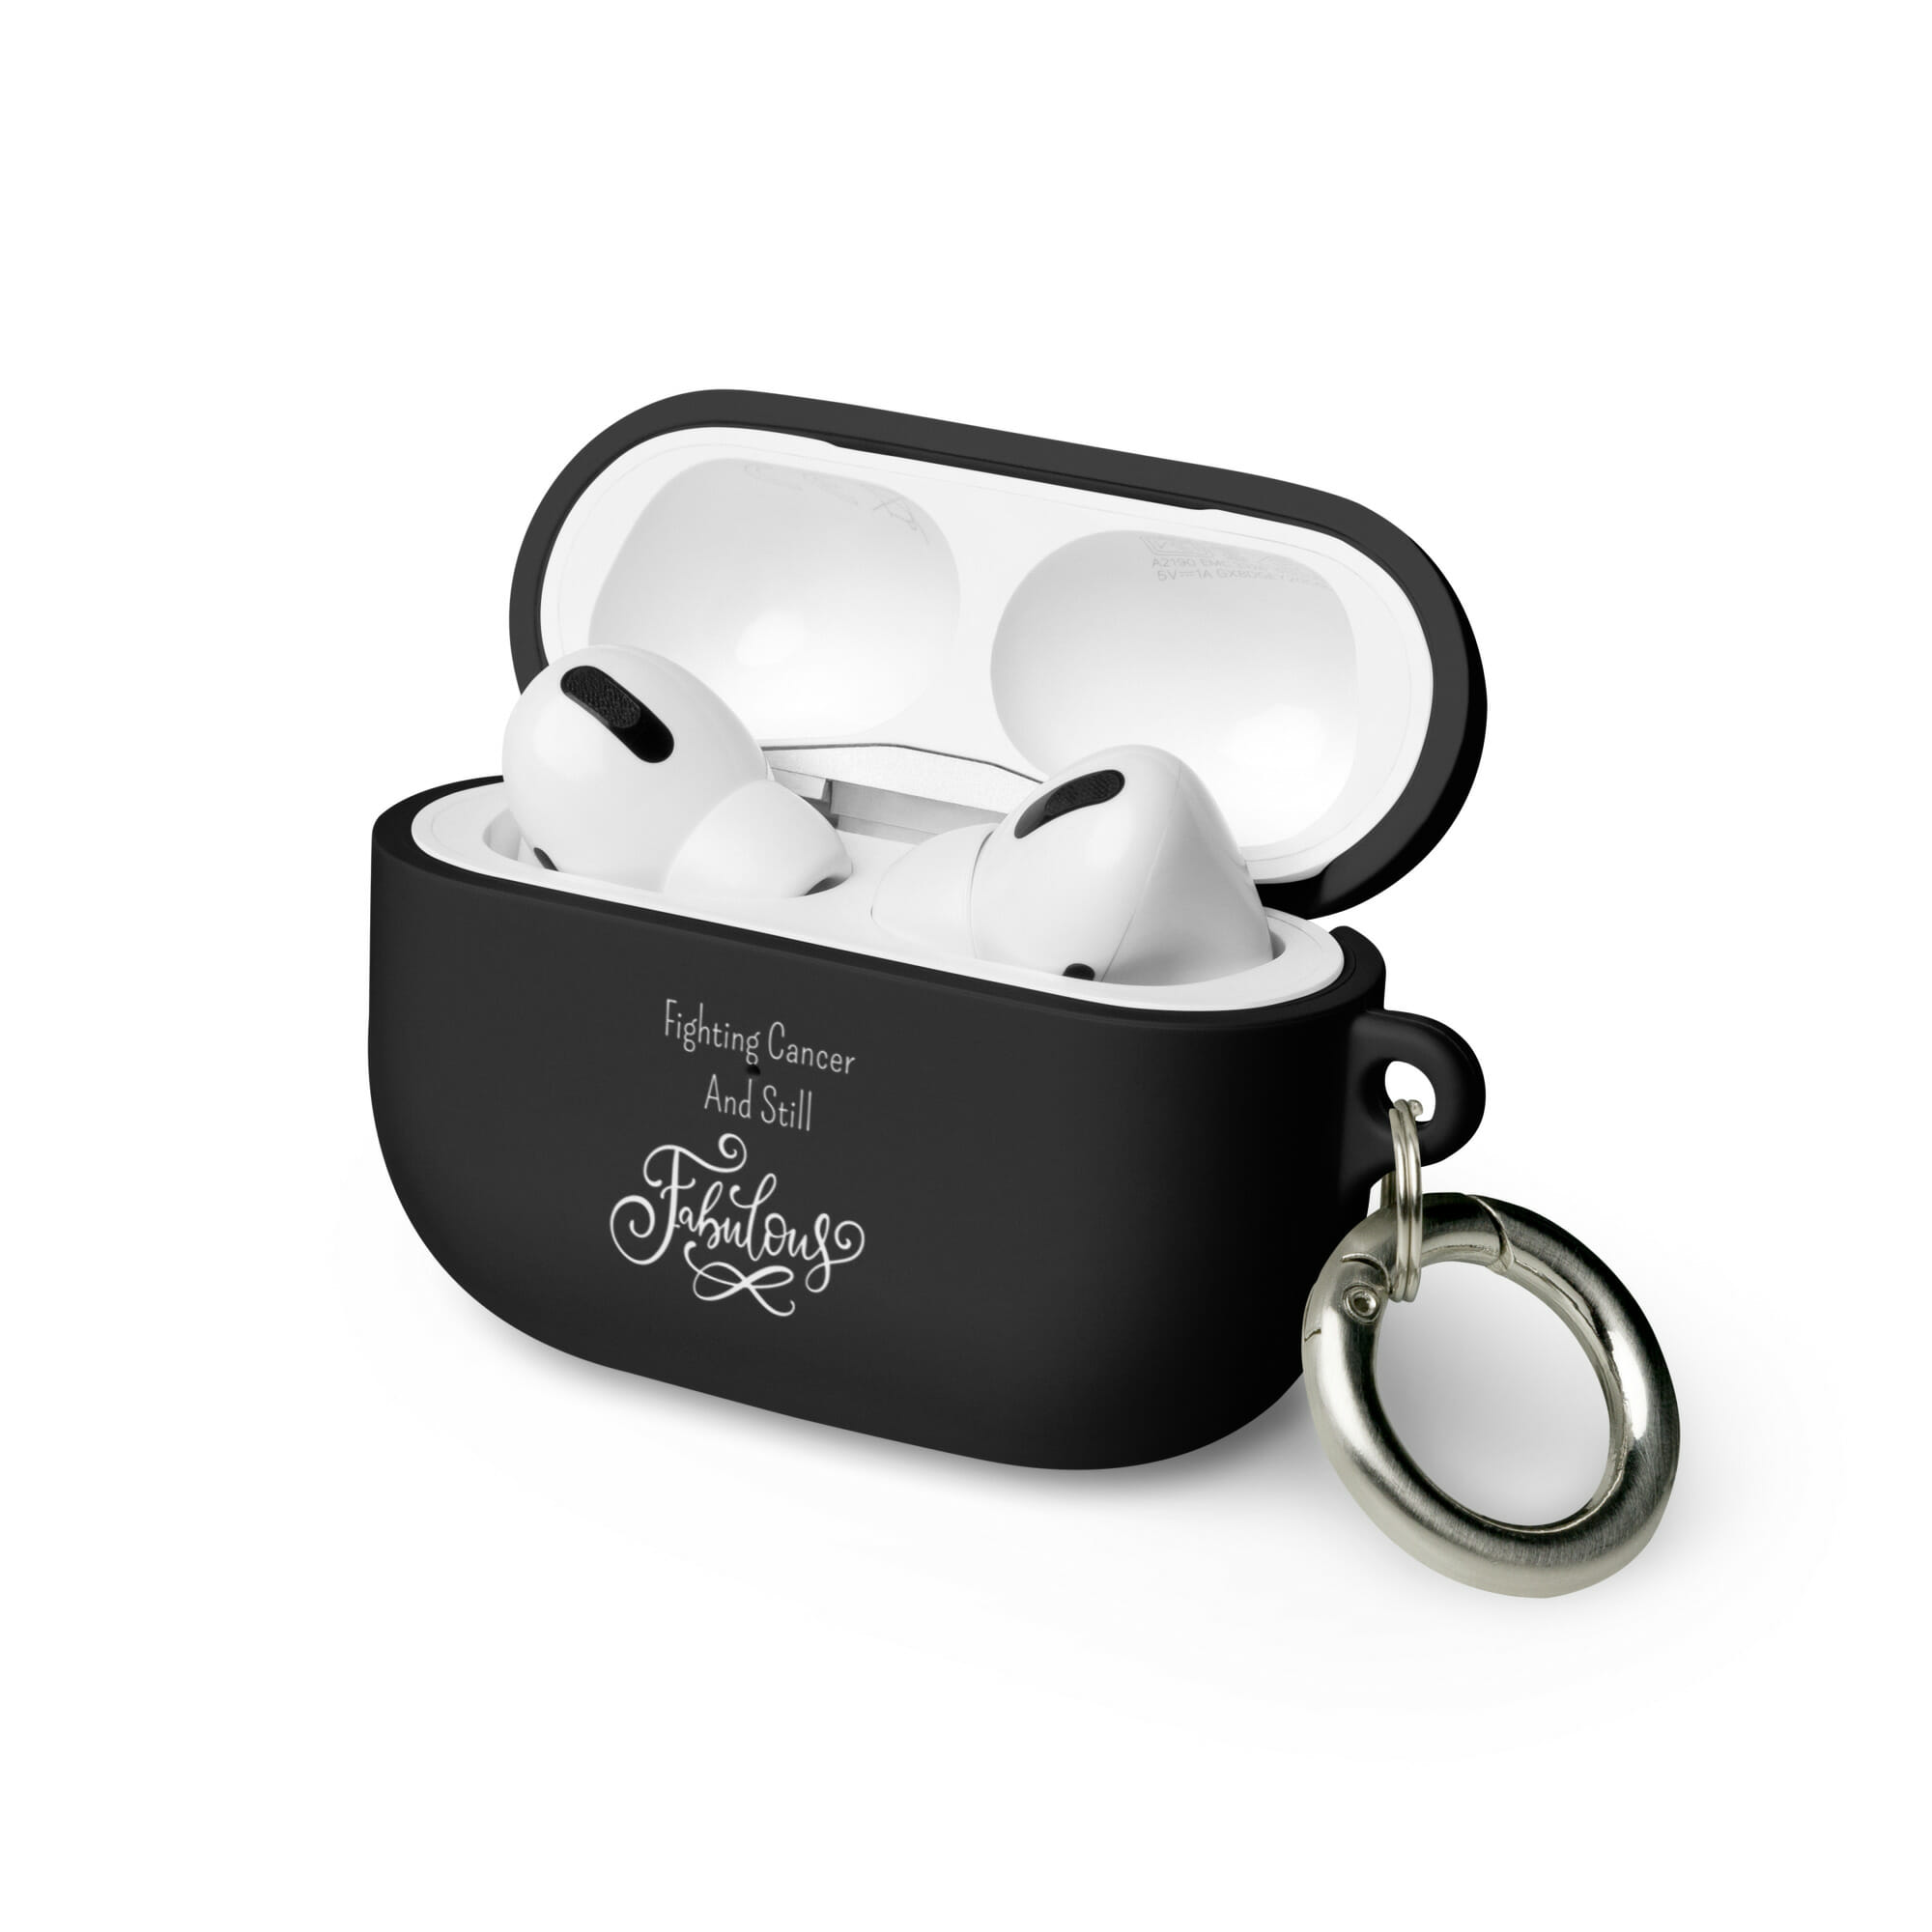 rubber-case-for-airpods-black-airpods-pro-front-647b021b619a2.jpg